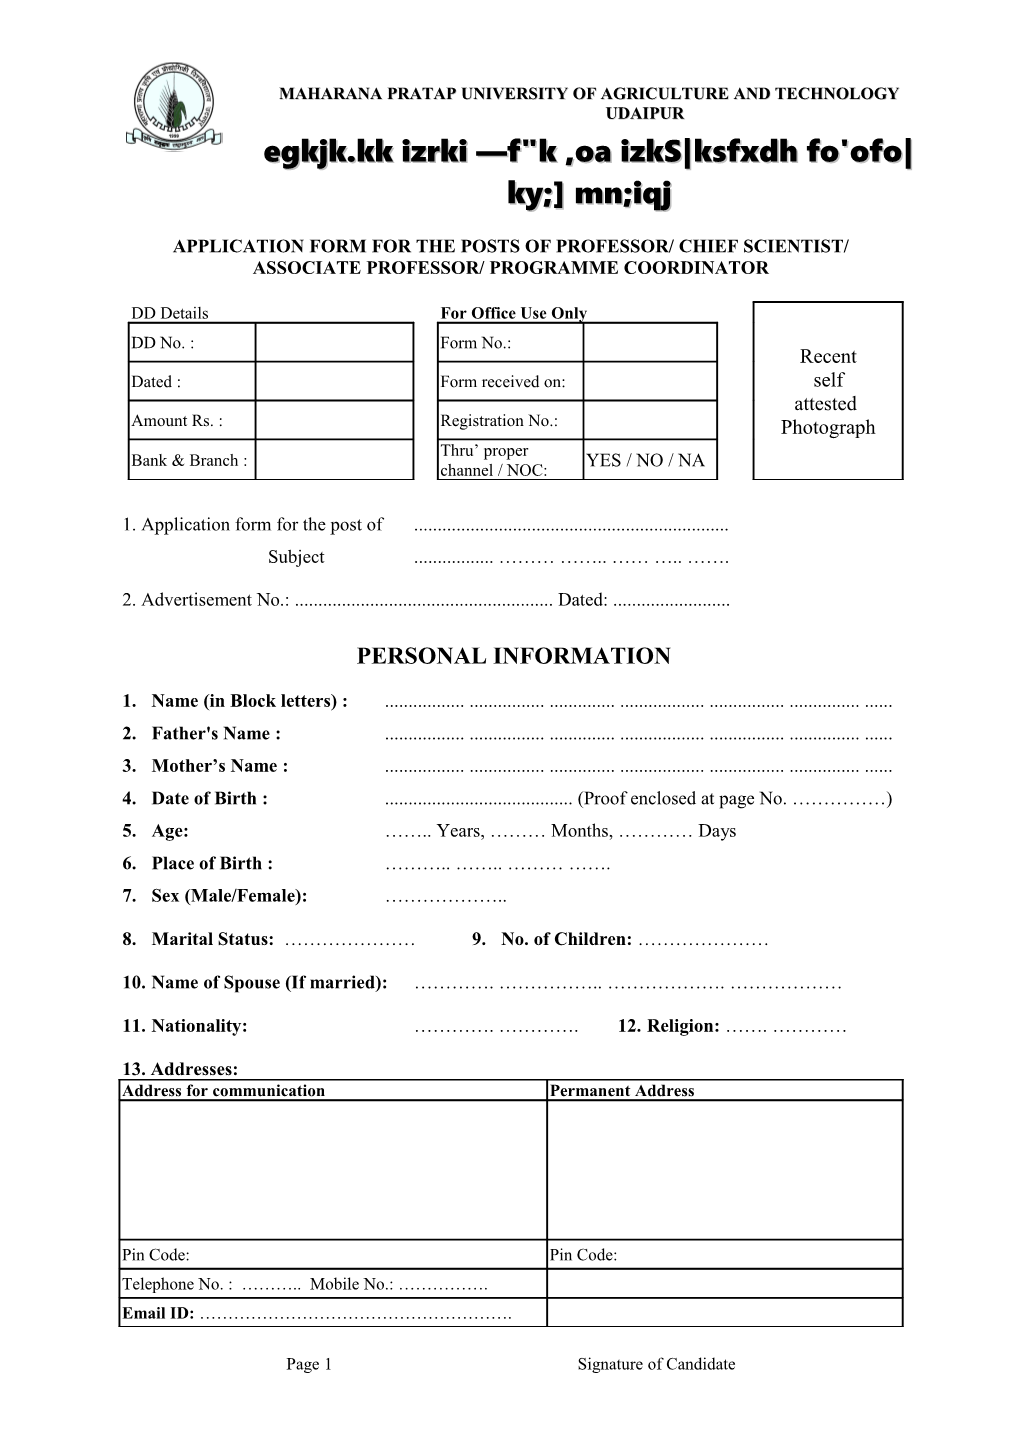 Application Form for the Posts Ofprofessor/ Chief Scientist